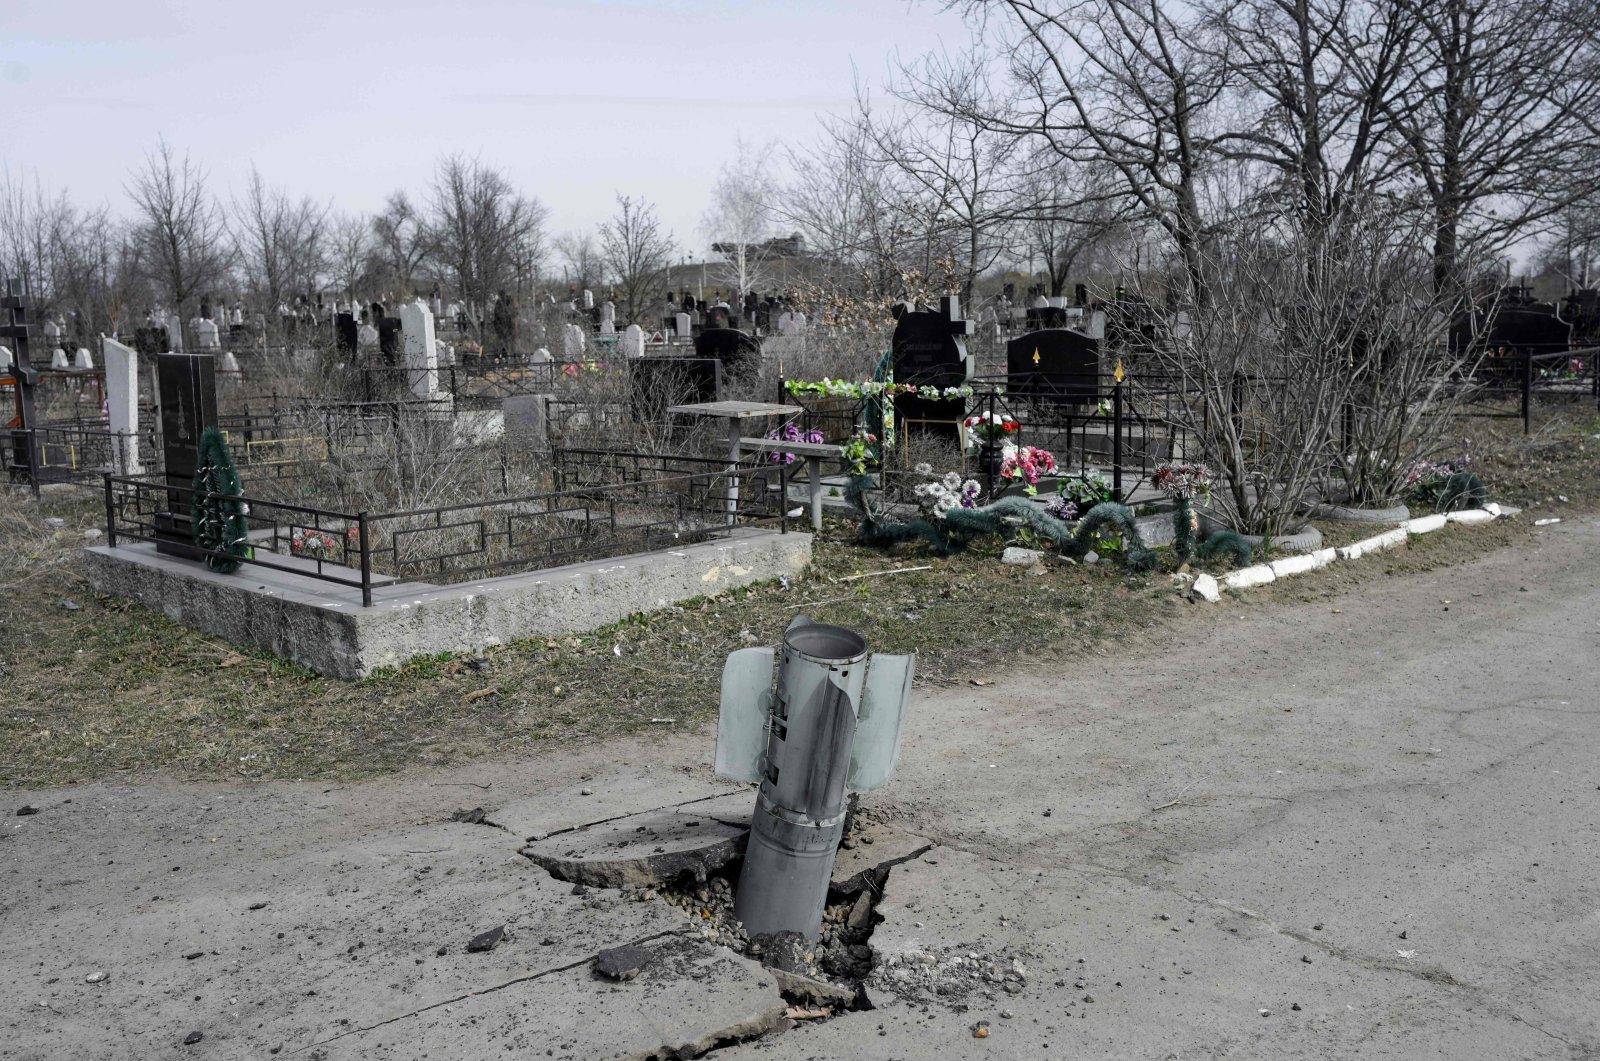 An unexploded rocket is pictured in the cemetery of Mykolaiv, southern Ukraine, March 21, 2022. (AFP Photo)